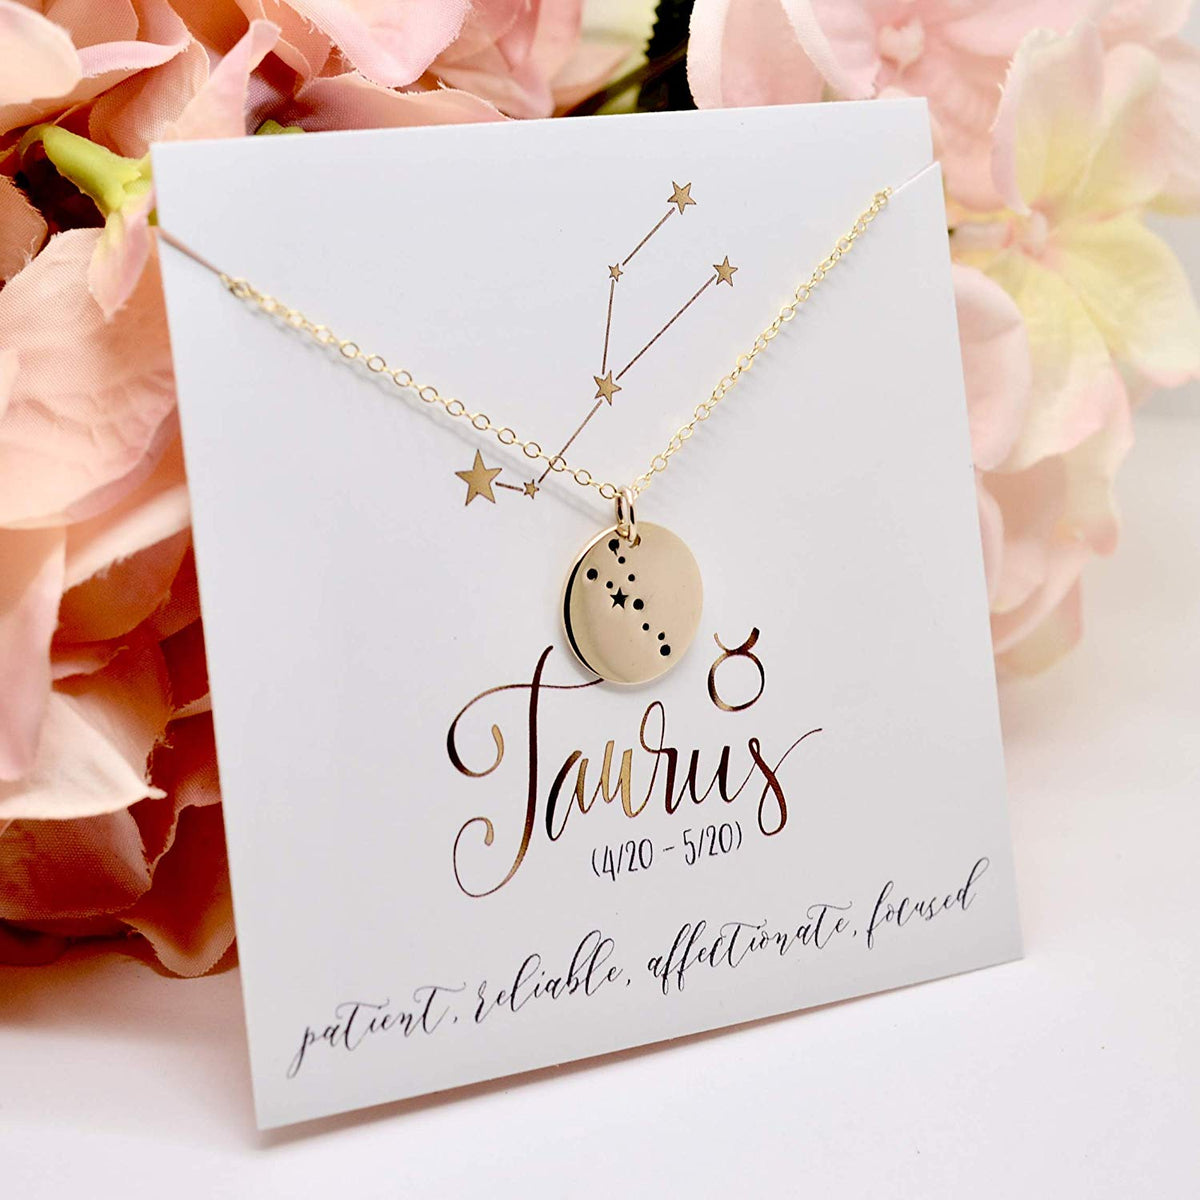 Taurus Zodiac Sign 14K Gold Filled Constellation Necklace - Love It Personalized